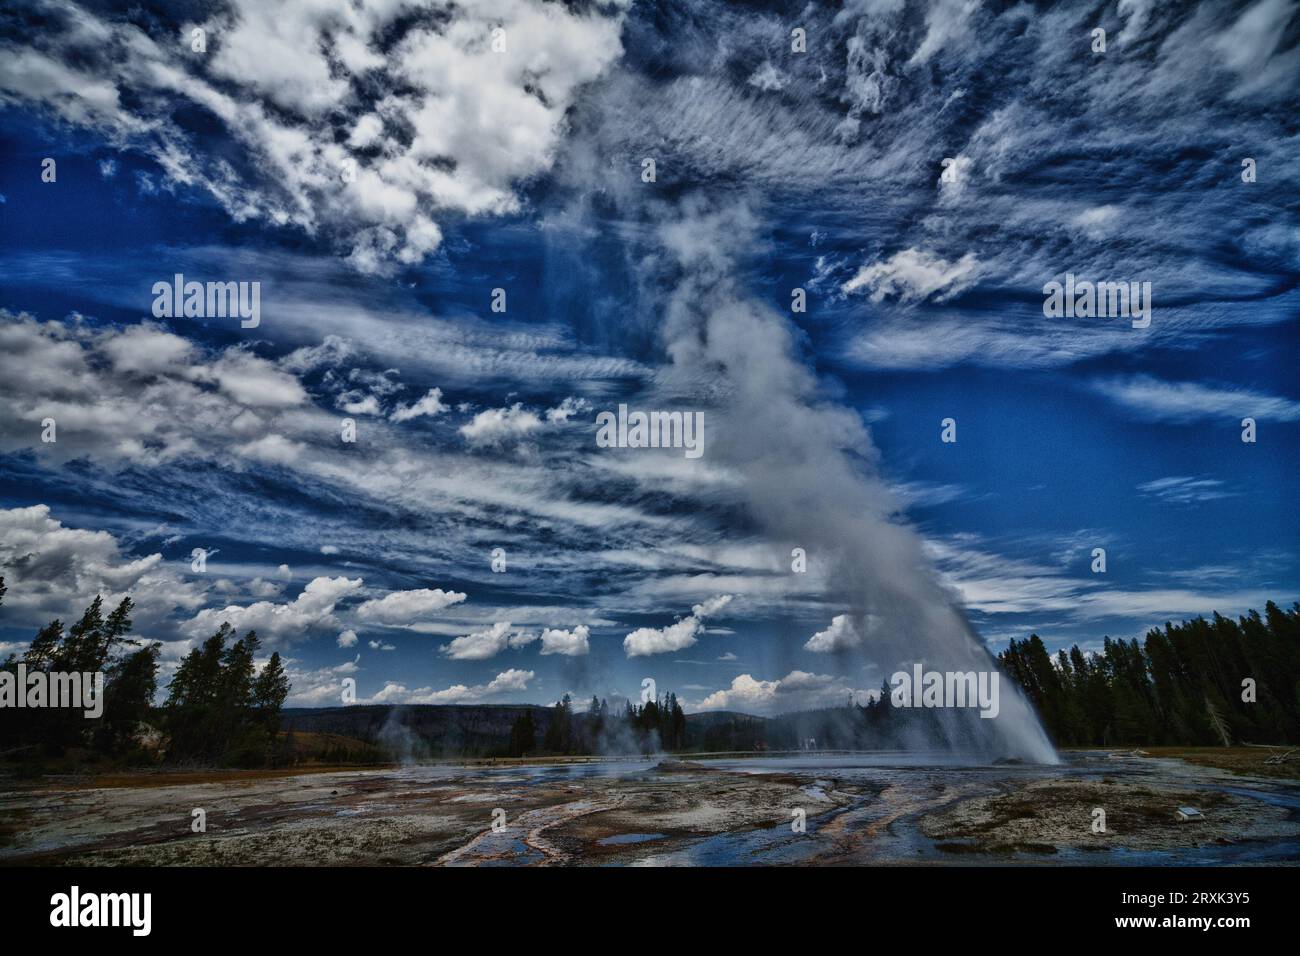 Daisy Geyser is one of the most famous, predictable geysers erupting every 2 to 3 hour for a period of 3 to 5 minutes erupt at an angle to the ground. Stock Photo